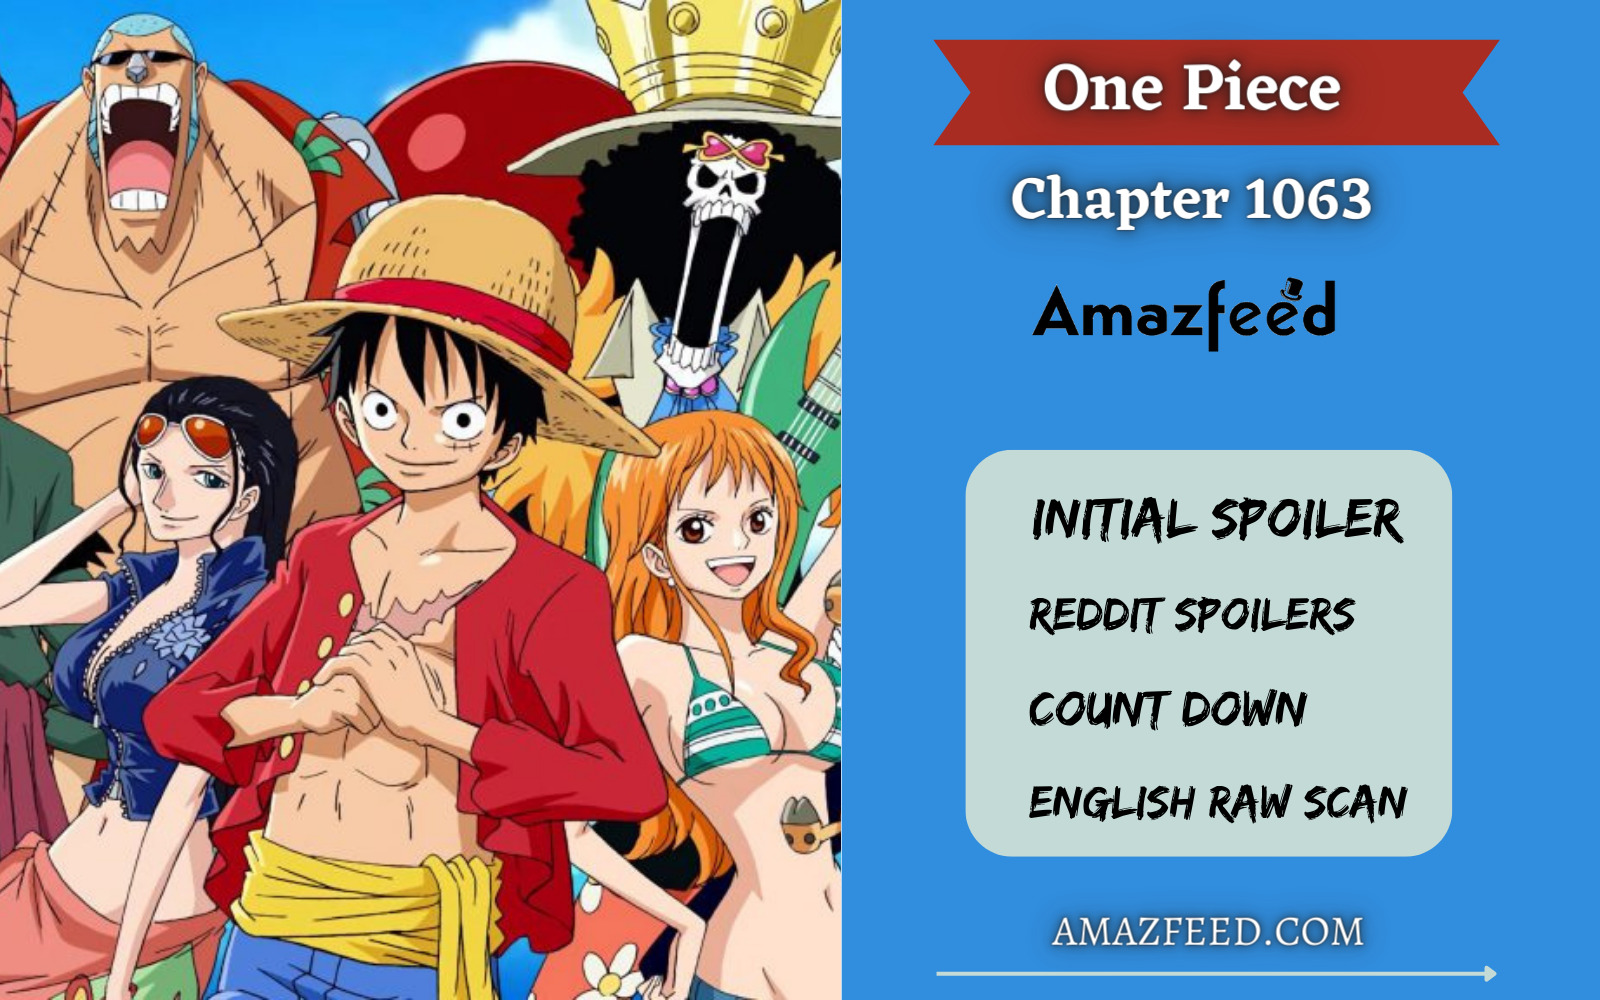 One Piece Chapter 1063 Initial Reddit Spoilers, Count Down, English Raw  Scan, Release Date, & Everything You Want to Know » Amazfeed